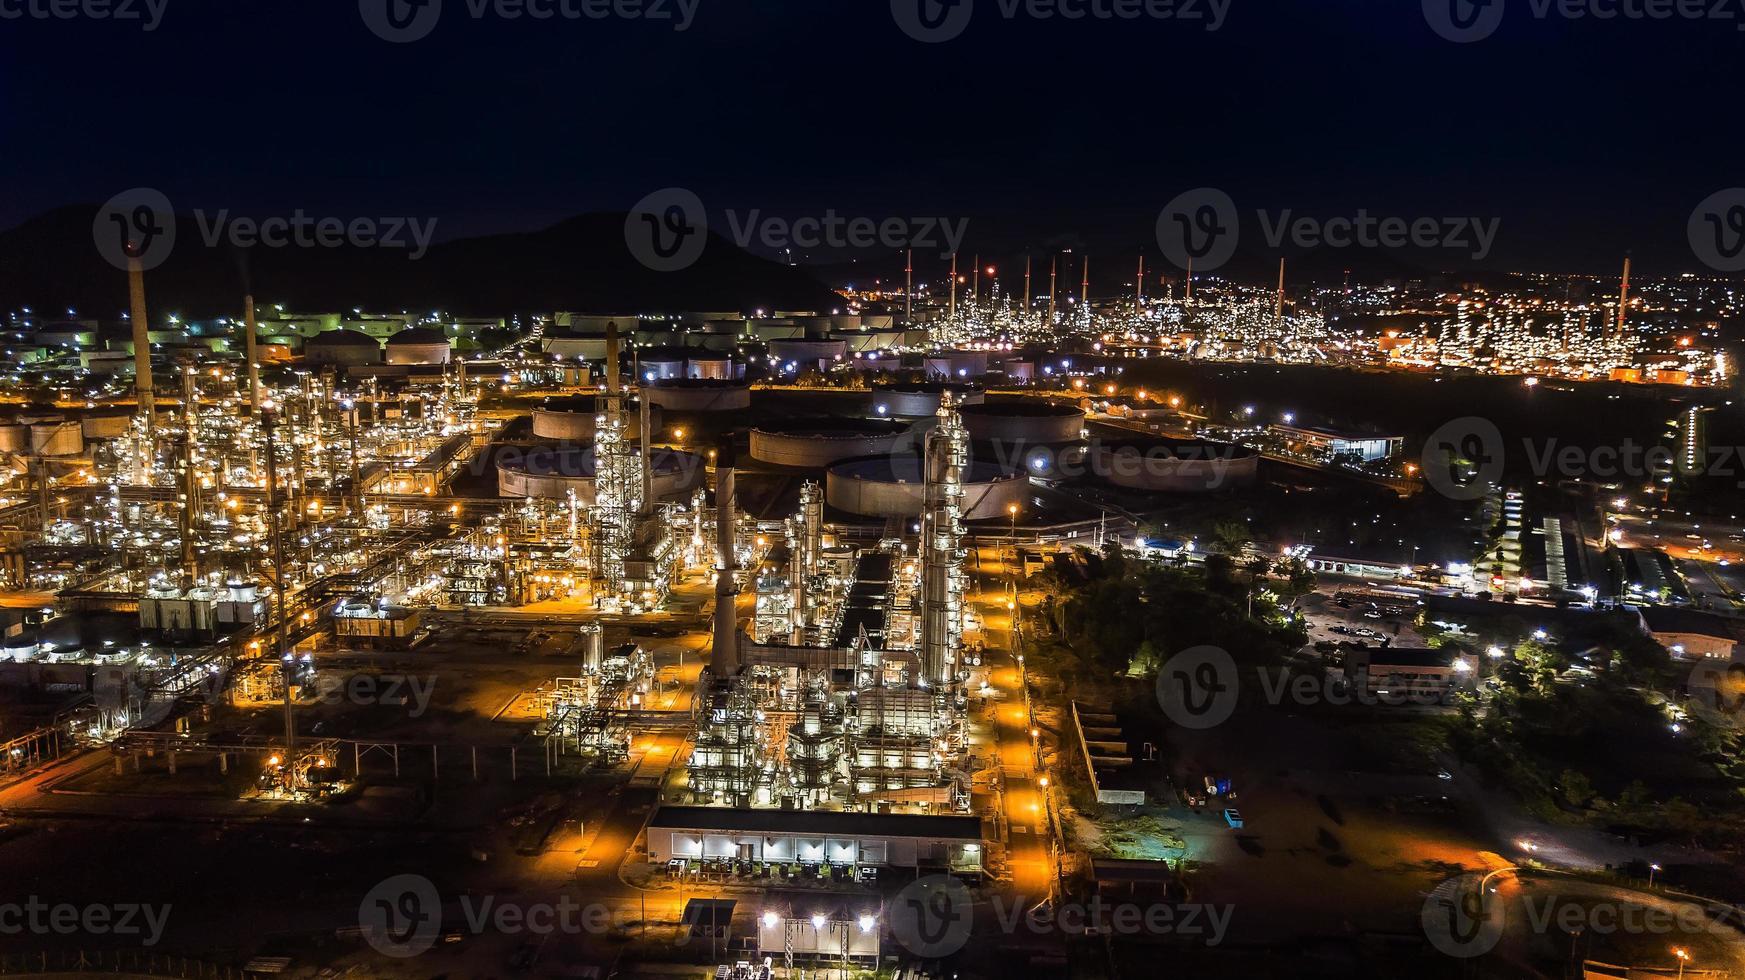 Oil refinery industry at night photo